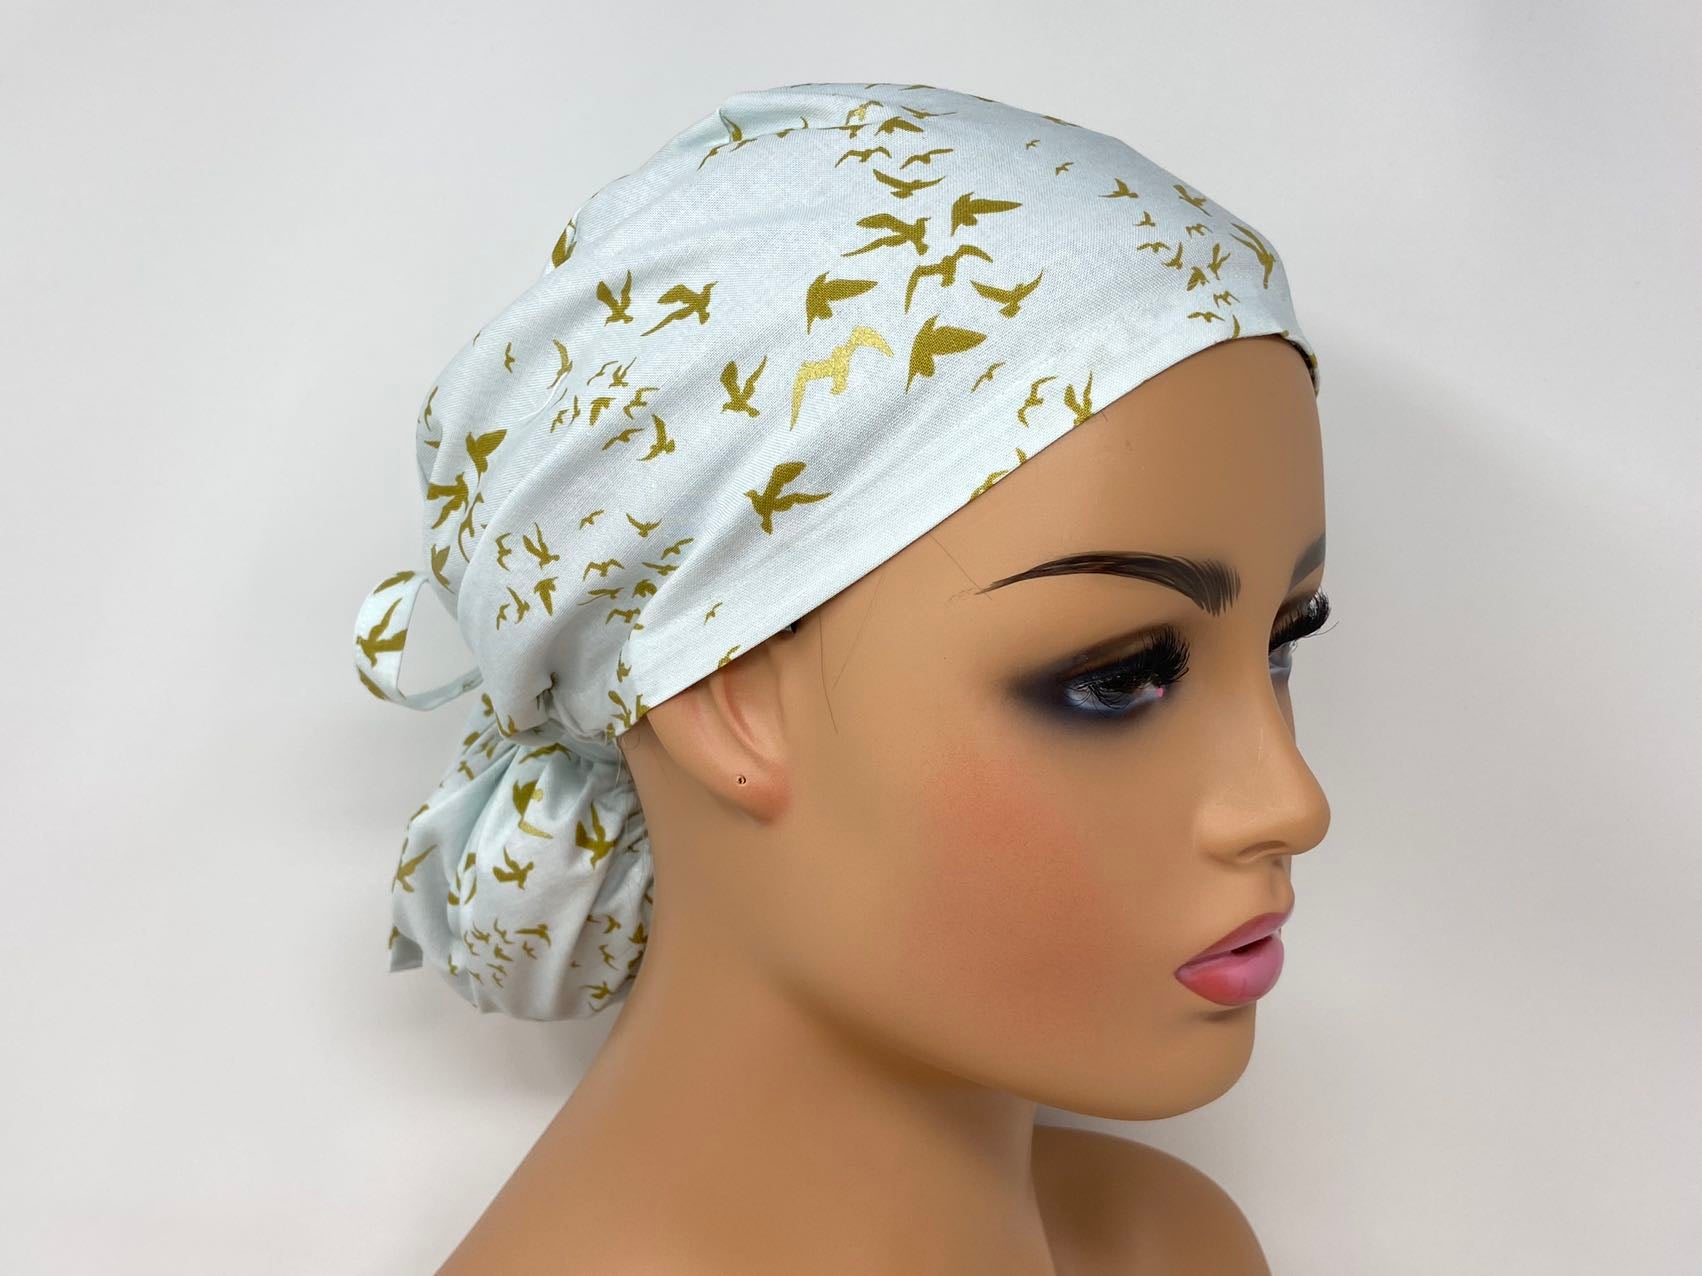 Sky of Doves with *Golden Metallic Print* - Ponytail